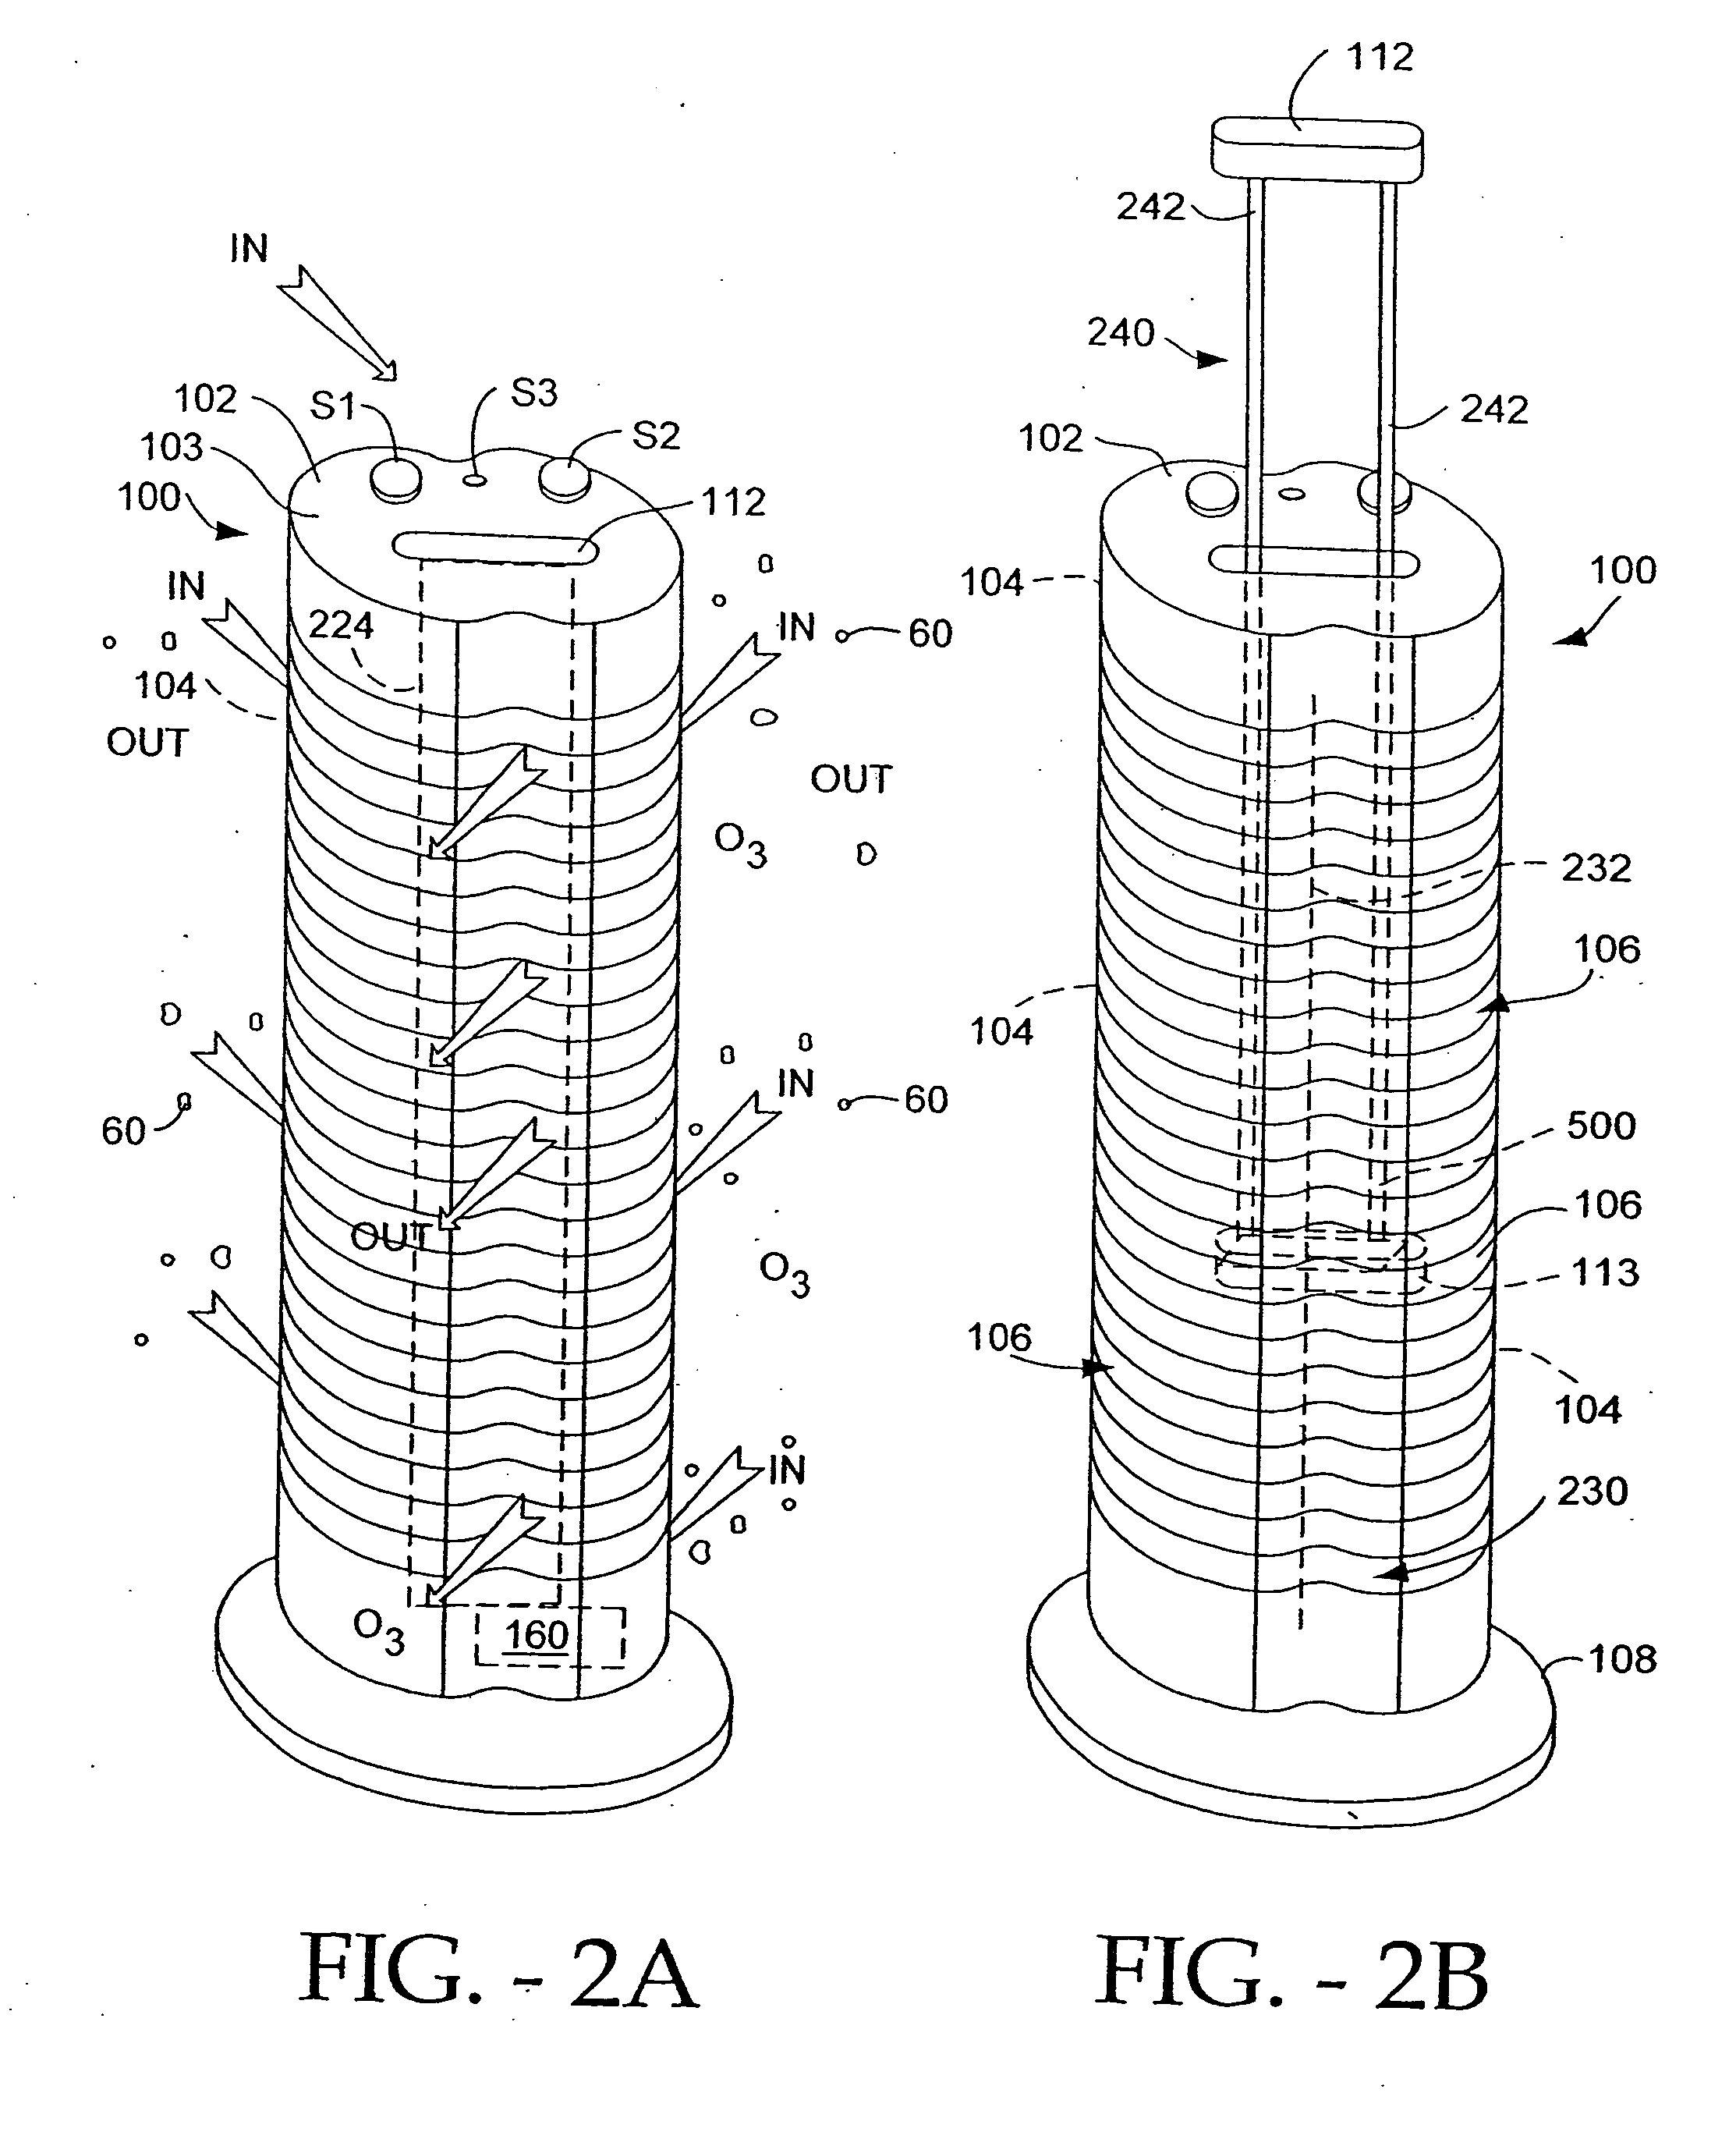 Electro-kinetic air transporter conditioner device with enhanced anti-microorganism capability and variable fan assist